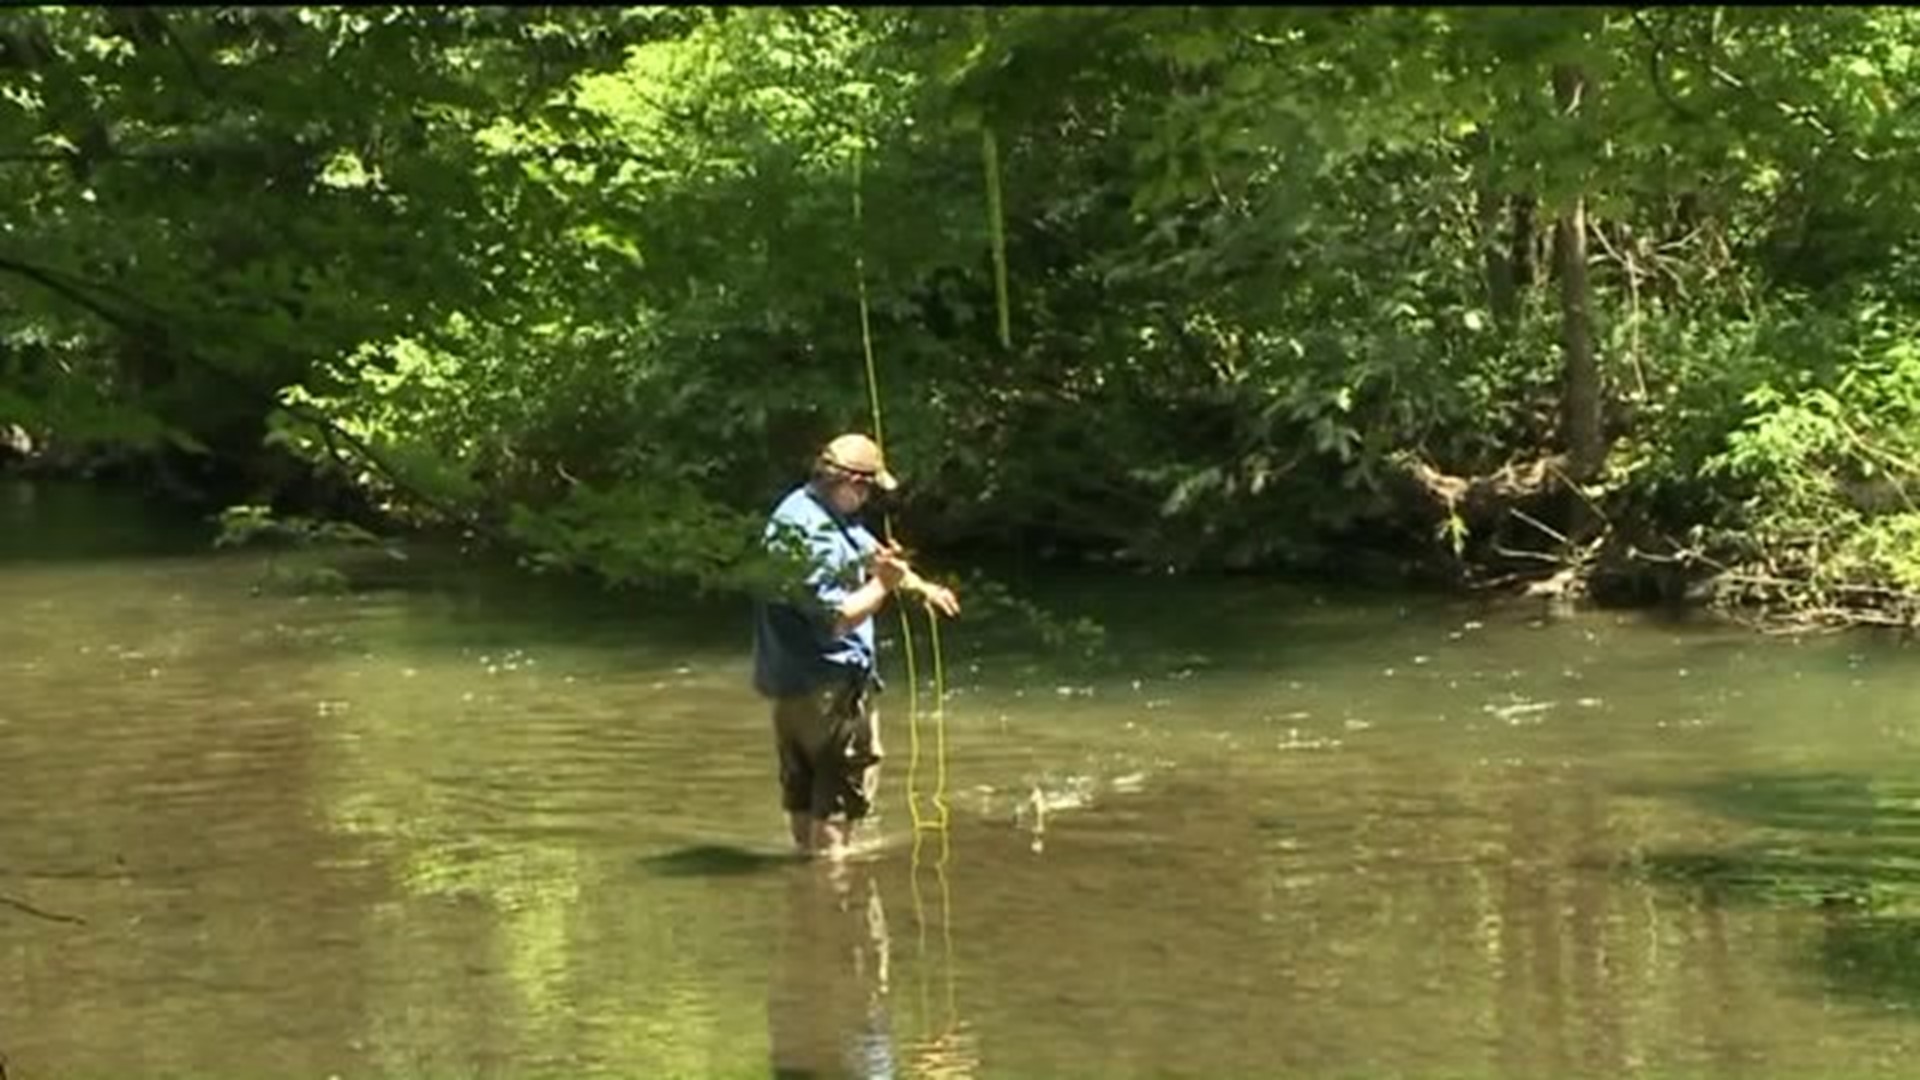 Veterans 'Catch' Some Relaxation in the Poconos